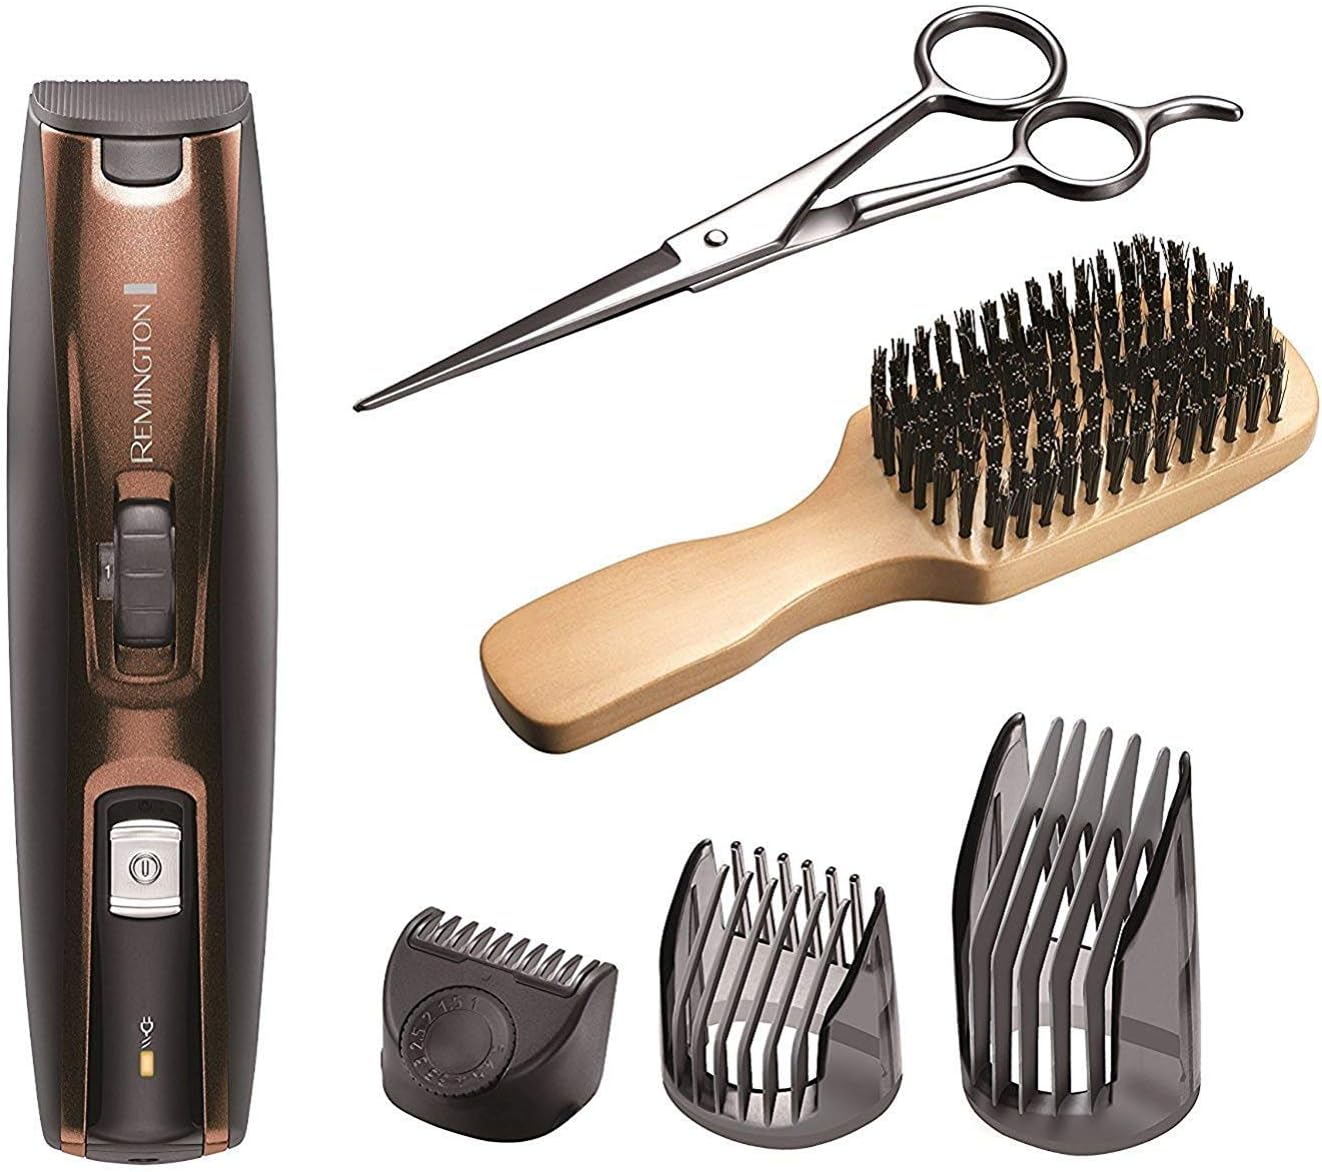 Remington Beard Trimmer Grooming Kit with Stubble Trimmer and 2 Adjustable Combs for Variable Lengths - MB4045